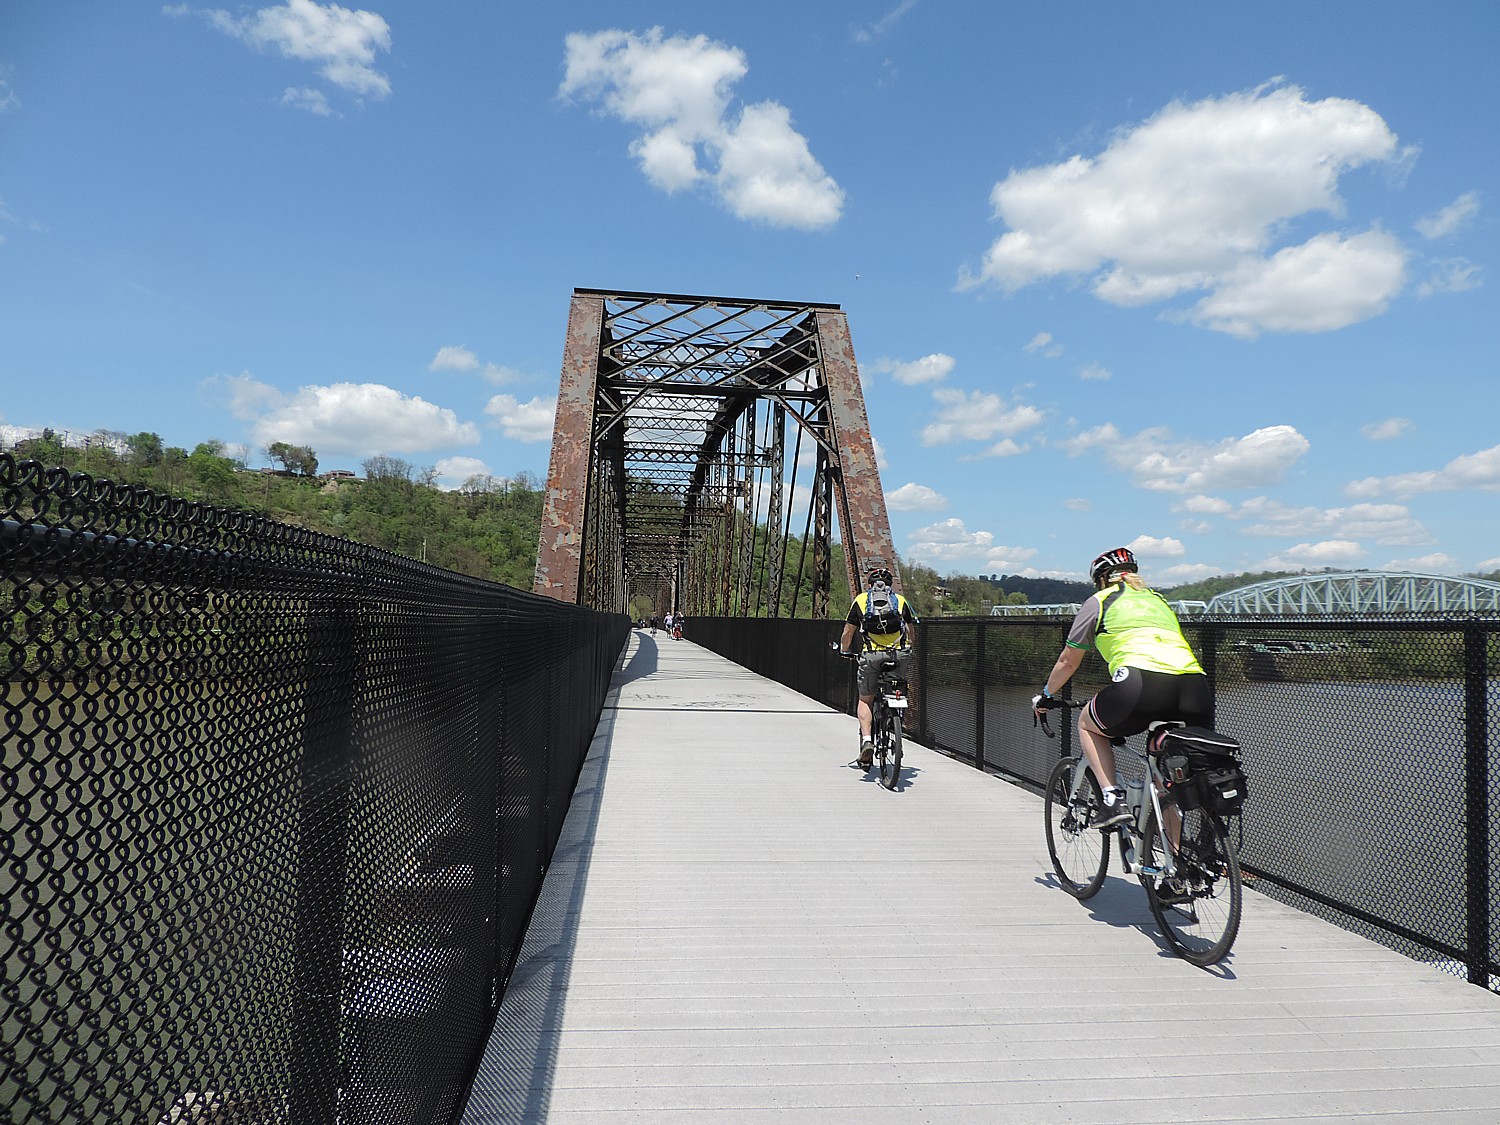 Riding over one of the rail bridges converted for biking use on the Great Allegheny Passage © 2016 Karen Rubin/goingplacesfarandnear.com